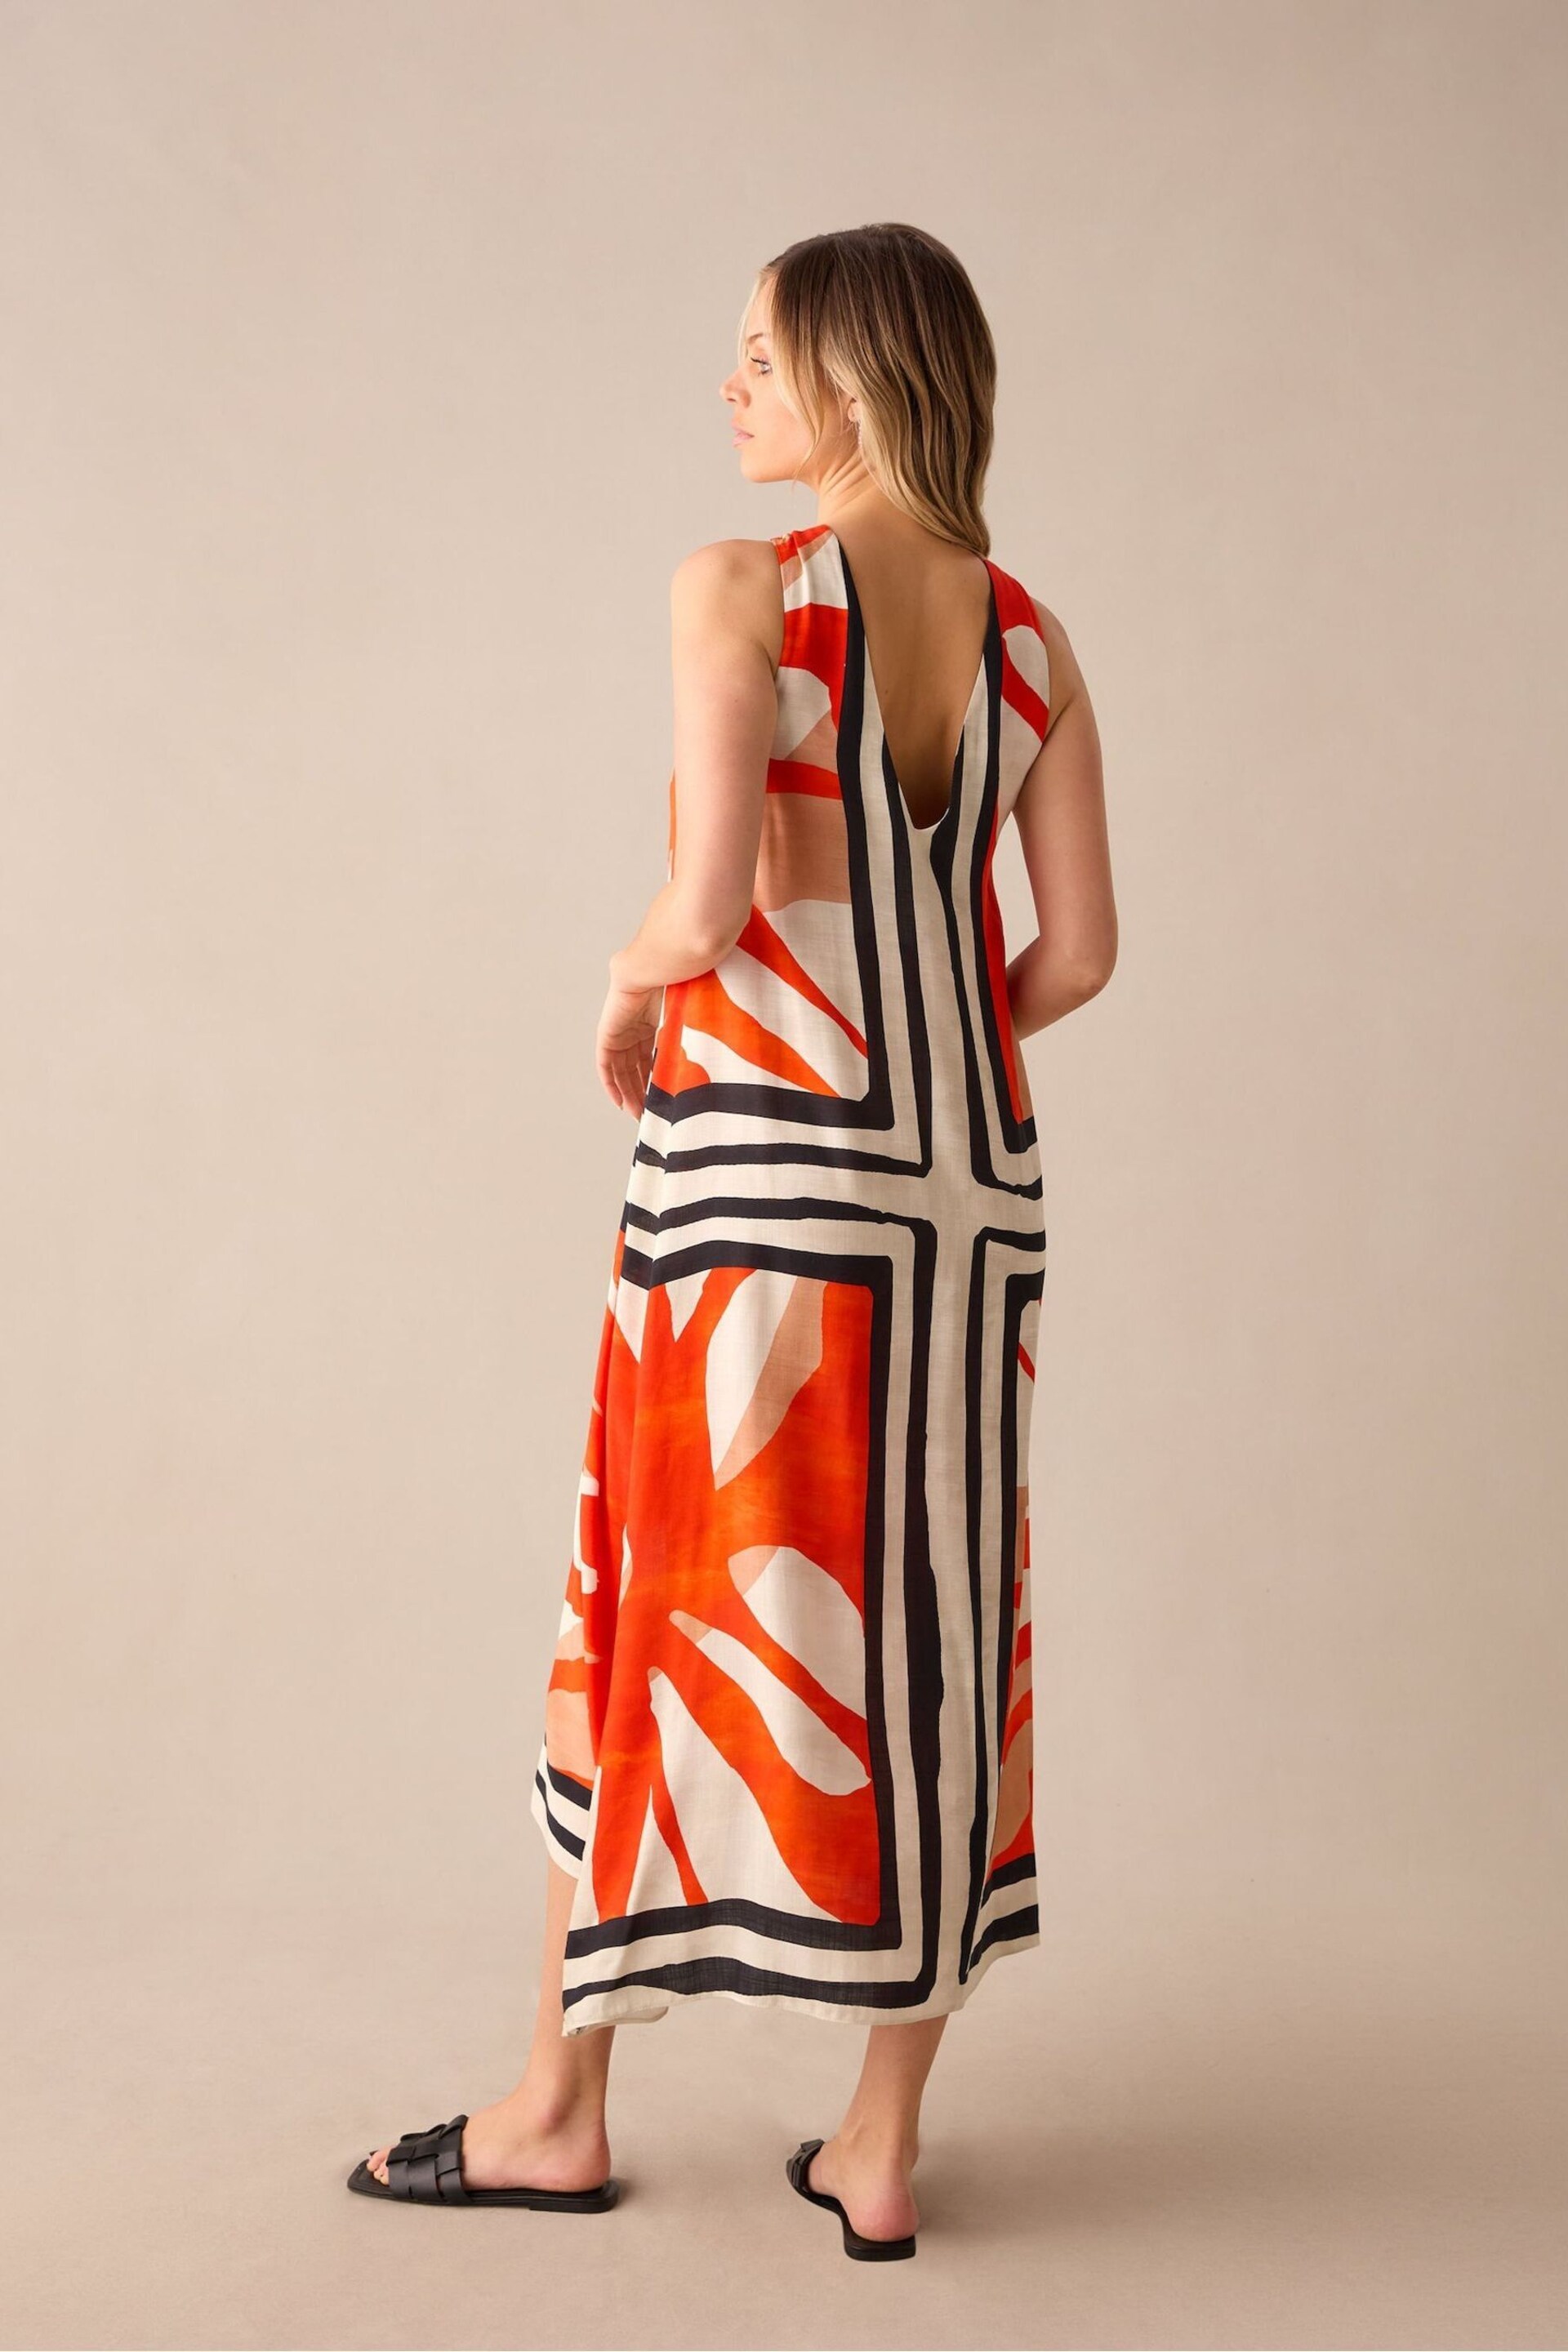 Ro&Zo Red Placement Print Twist Neck Dress - Image 5 of 5